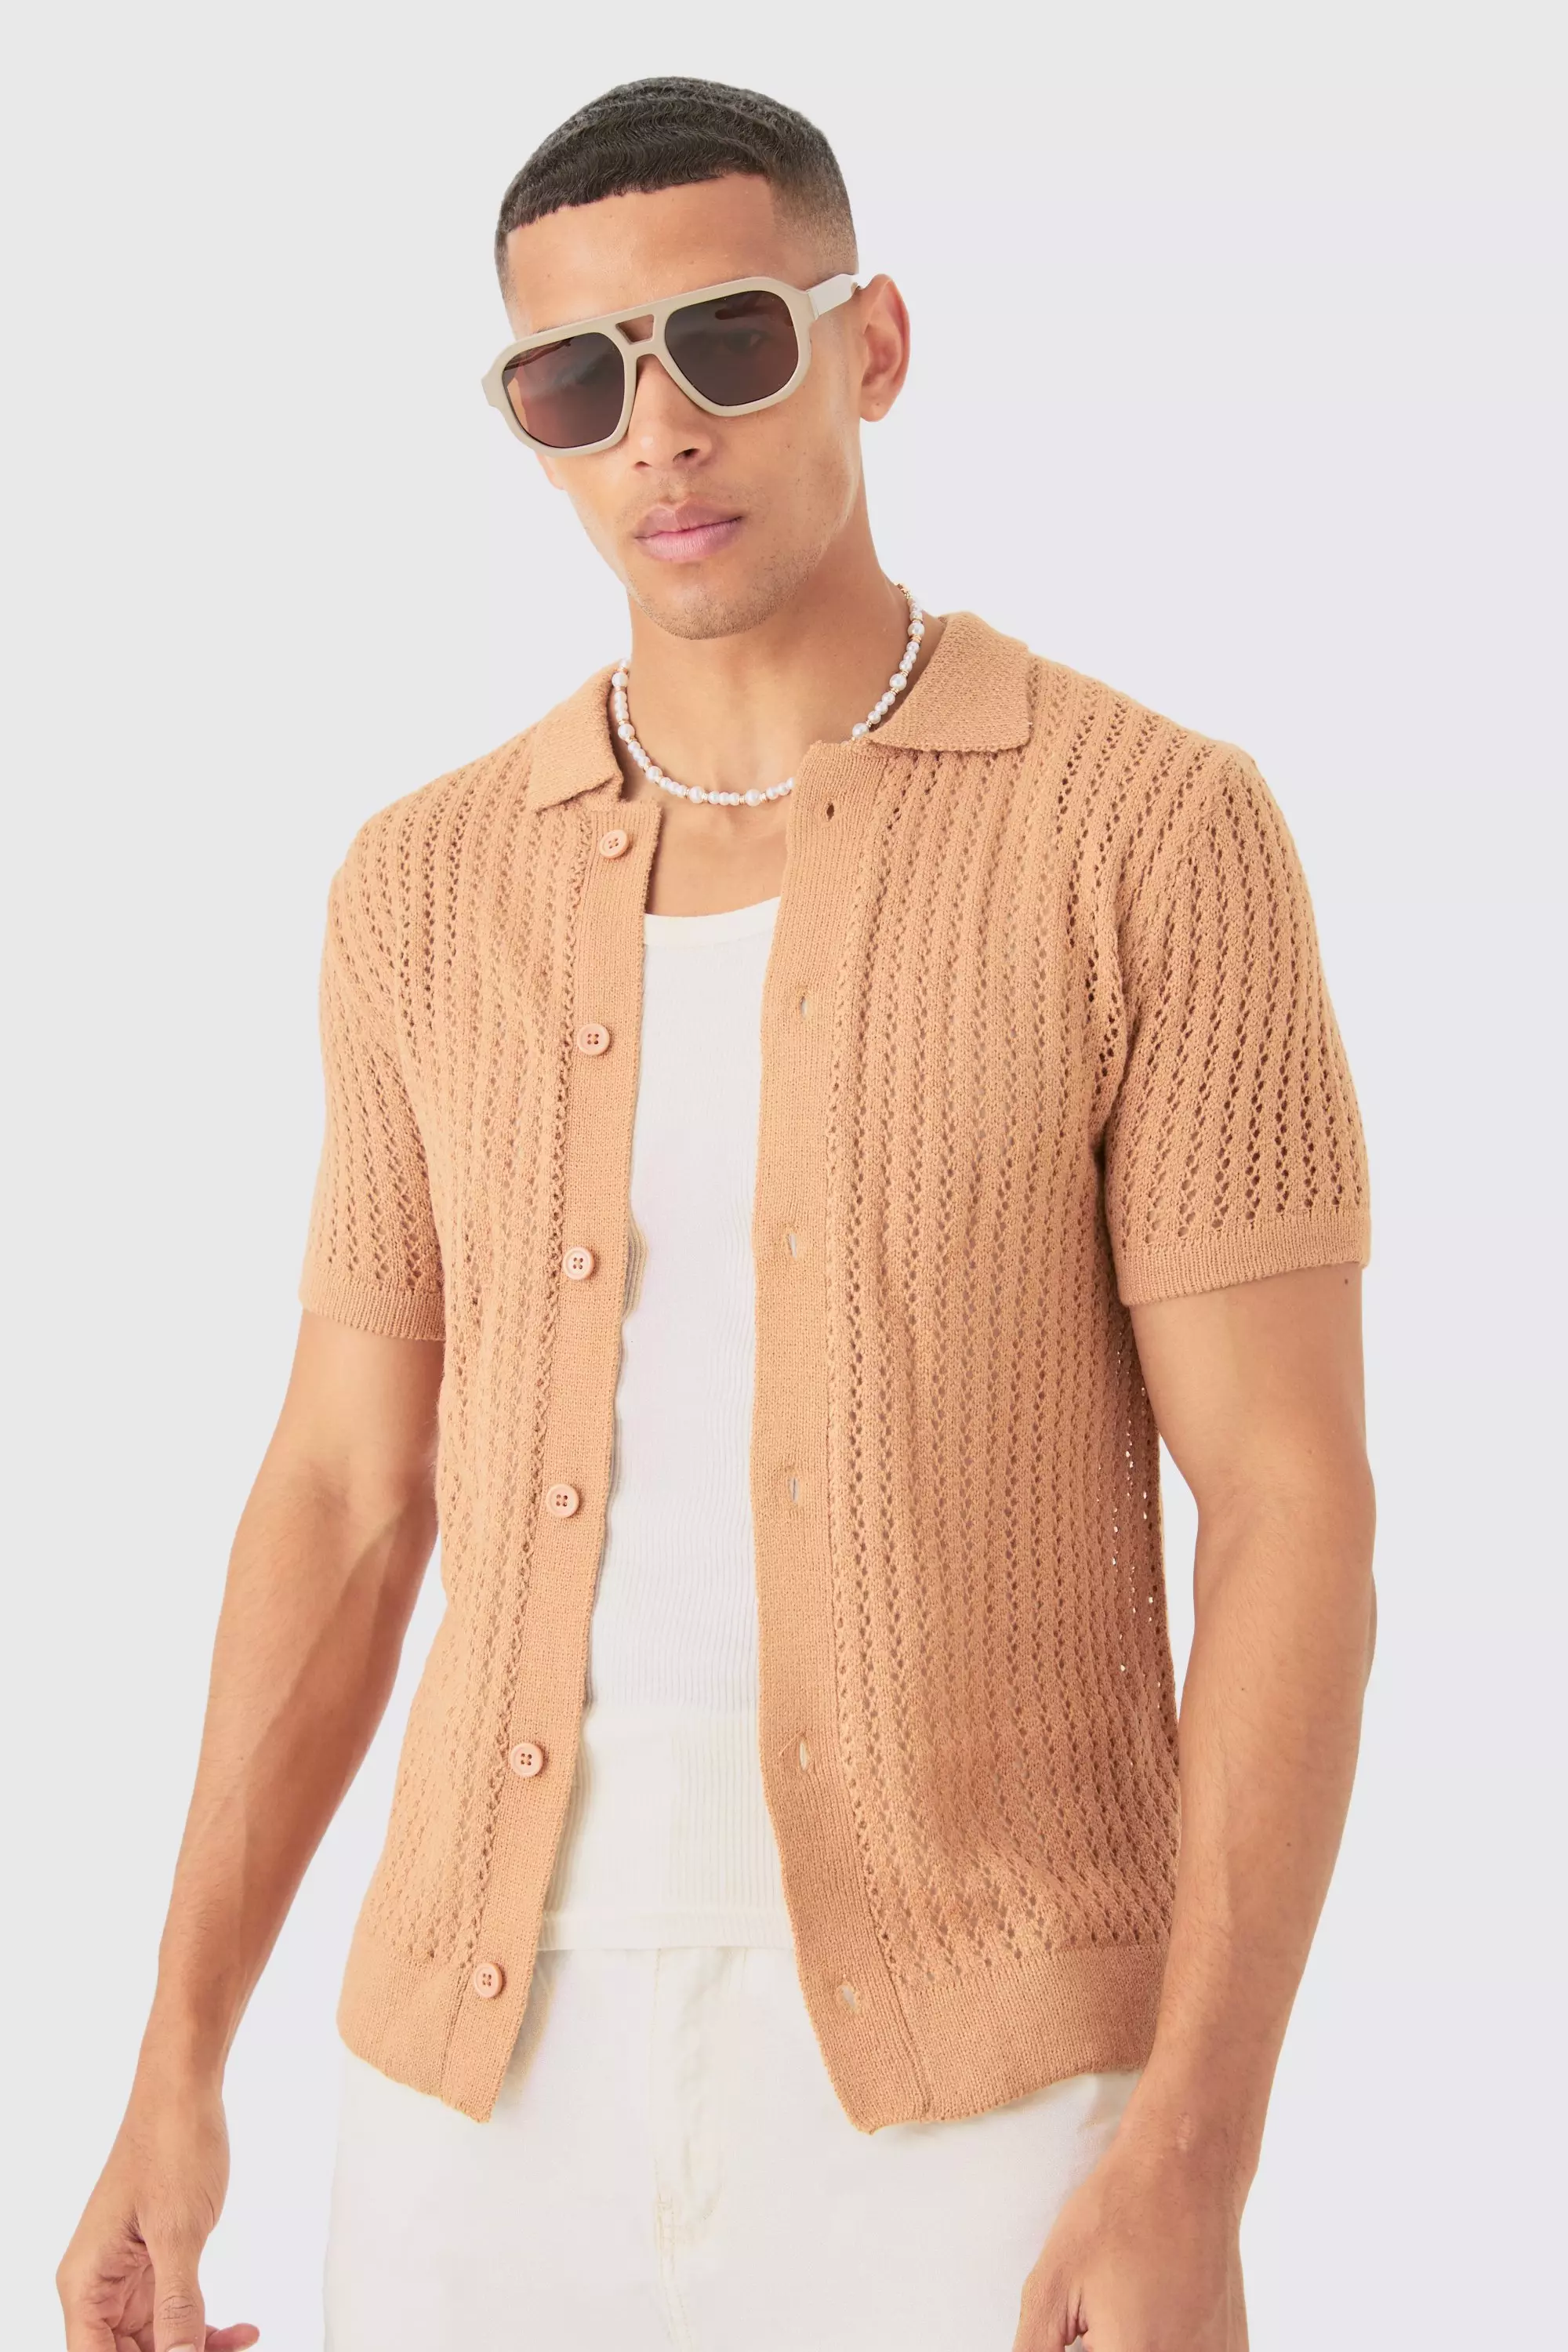 Beige Open Stitch Short Sleeve Knitted Shirt In Taupe